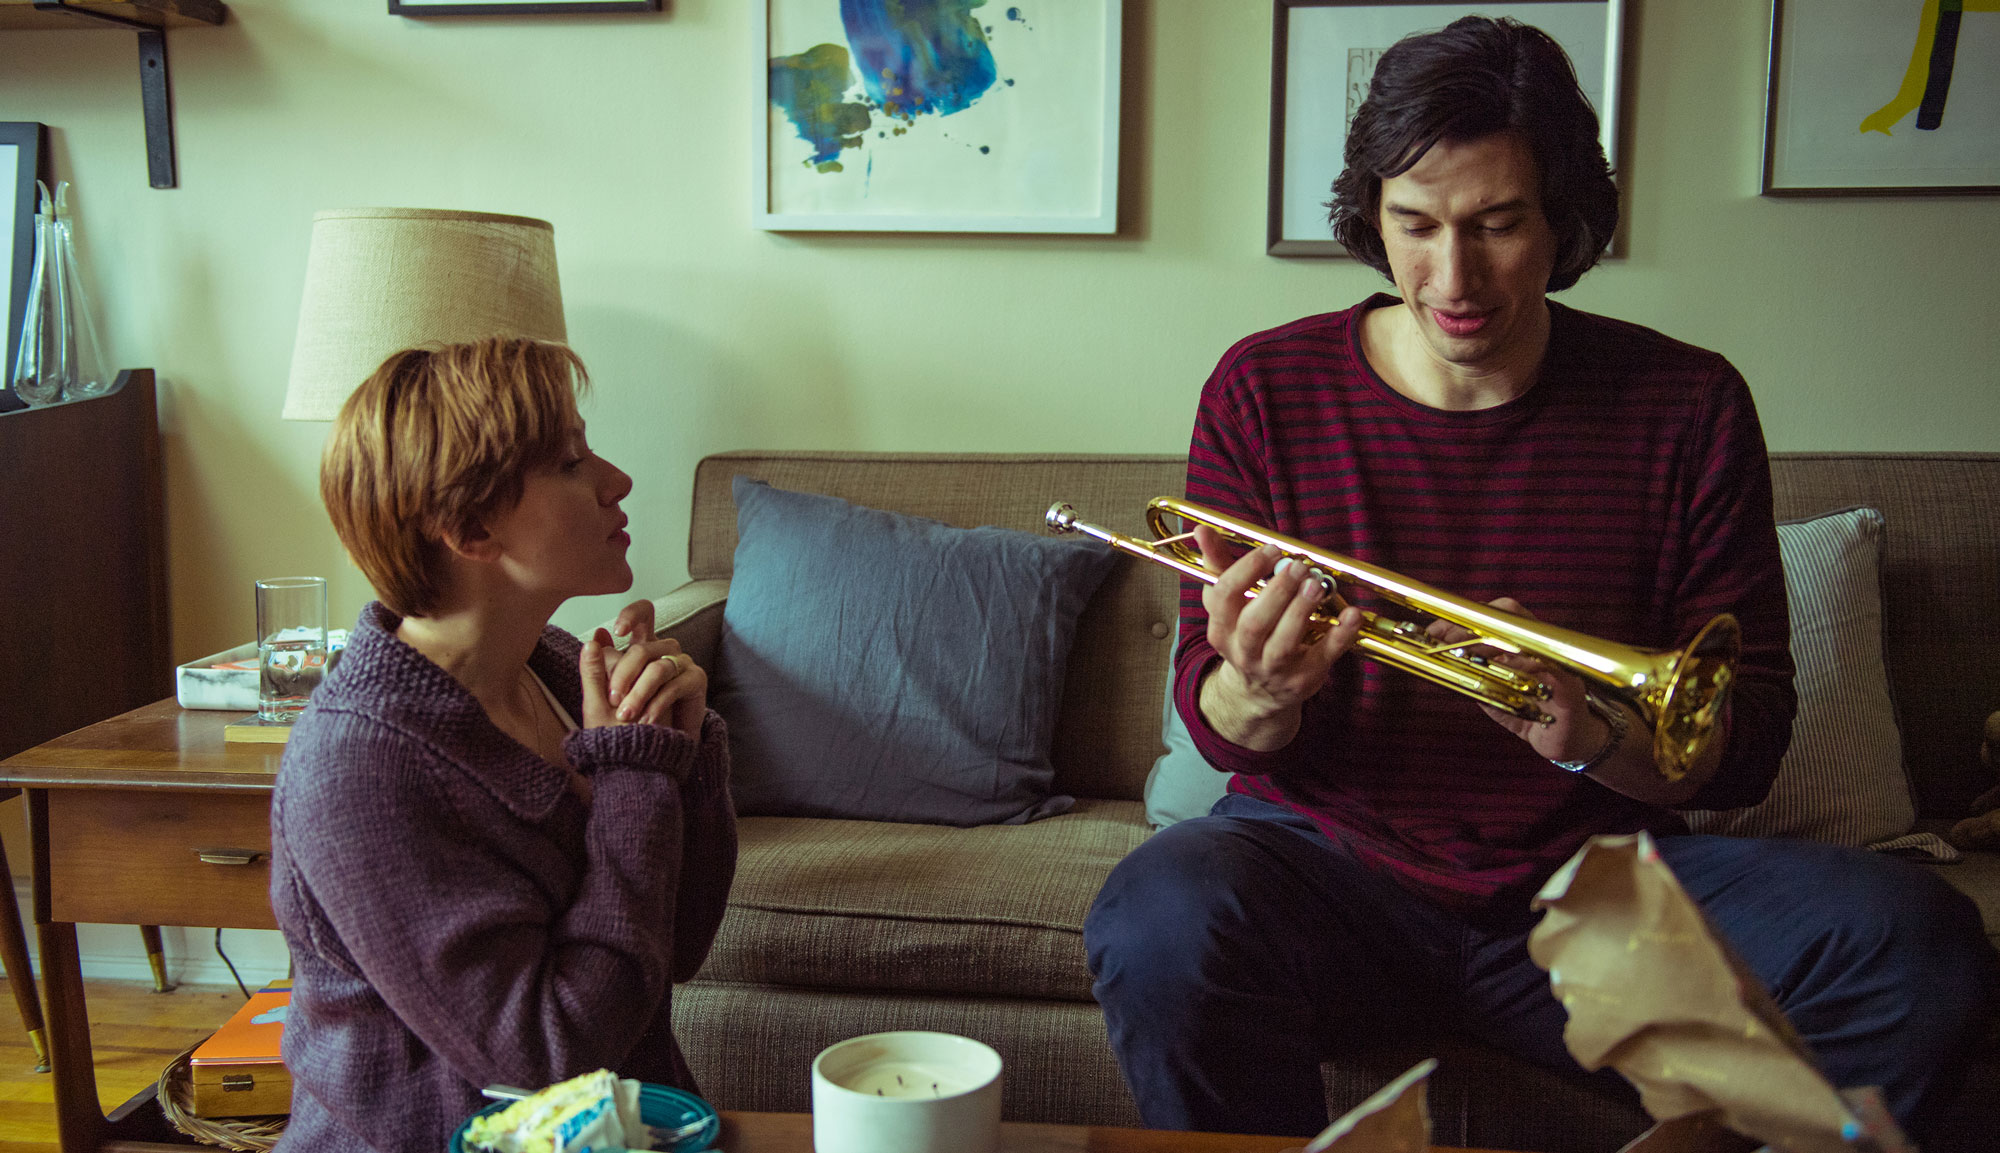 Scarlett Johansson and Adam Driver in "Marriage Story"